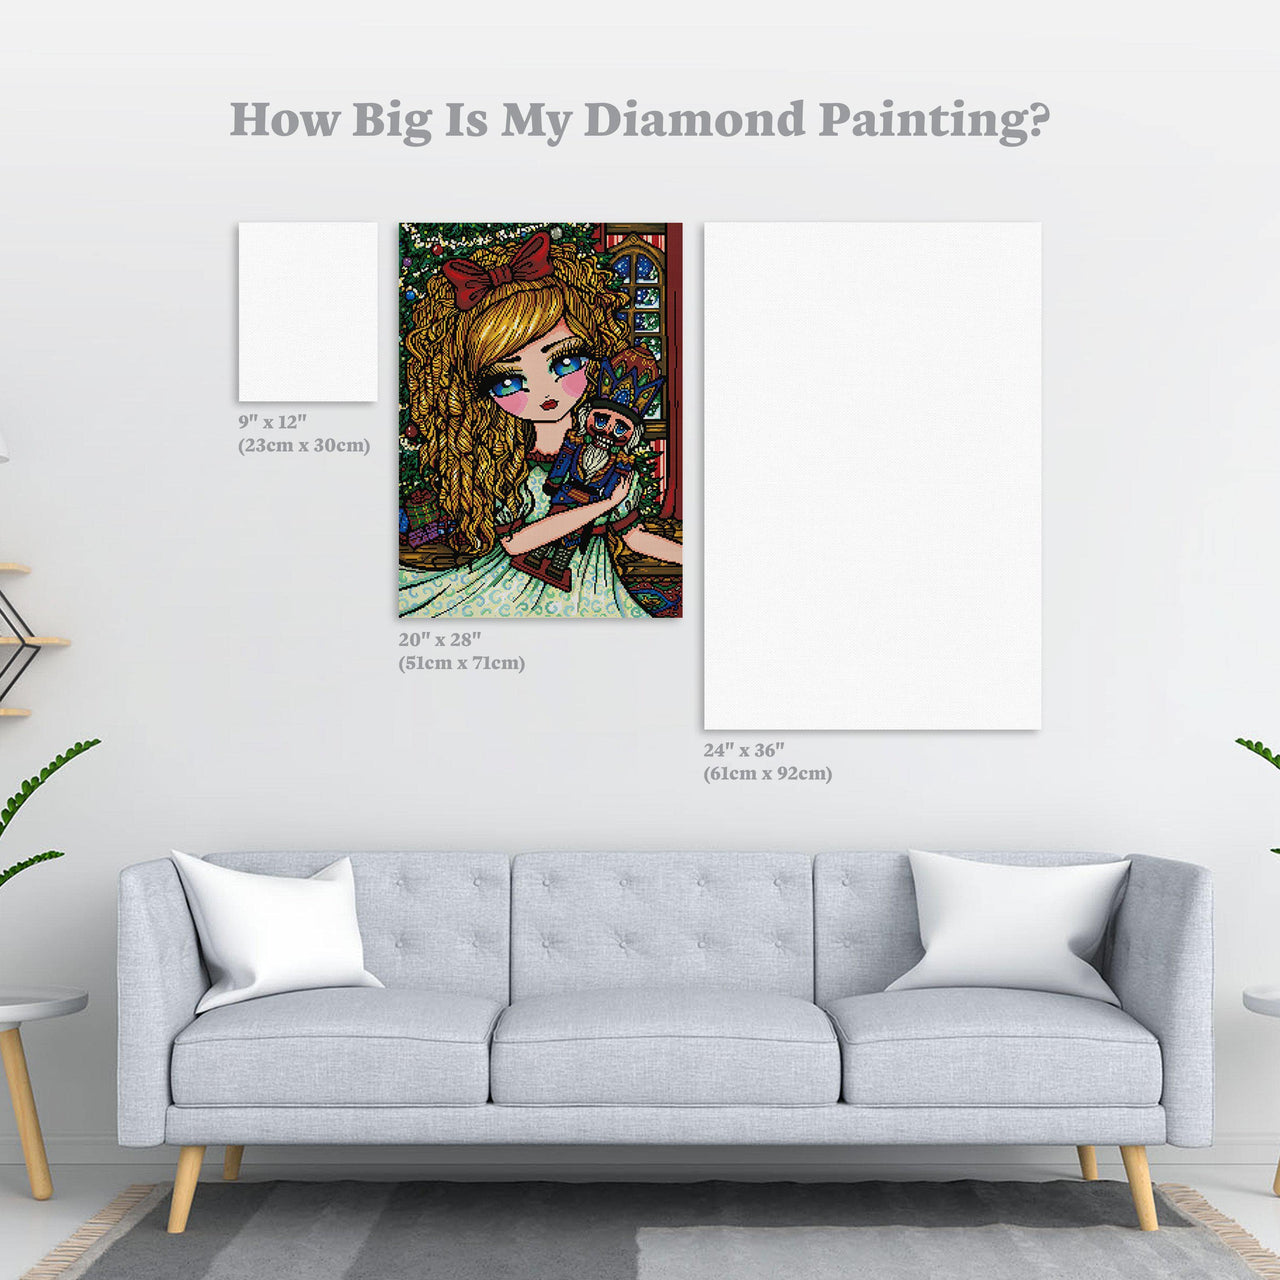 Diamond Painting Nutcracker 20" x 28″ (51cm x 71cm) / Square with 46 Colors including 3 ABs